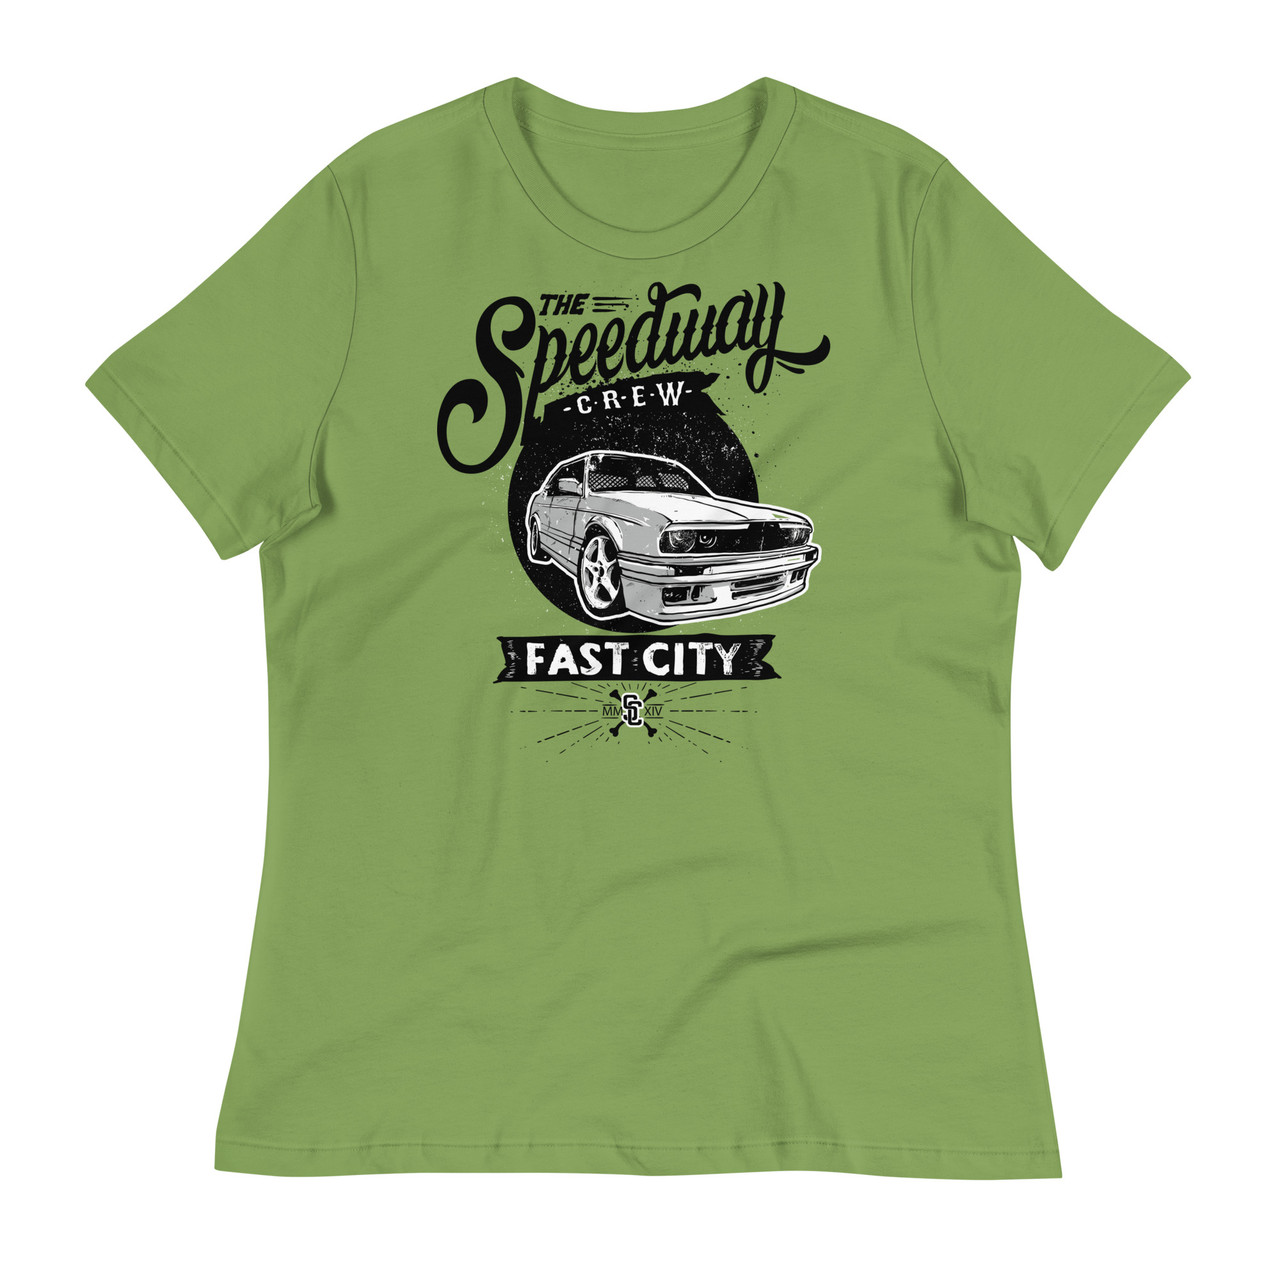 Leaf -The Speedway Crew Women's Relaxed T-Shirt - Bella + Canvas 6400